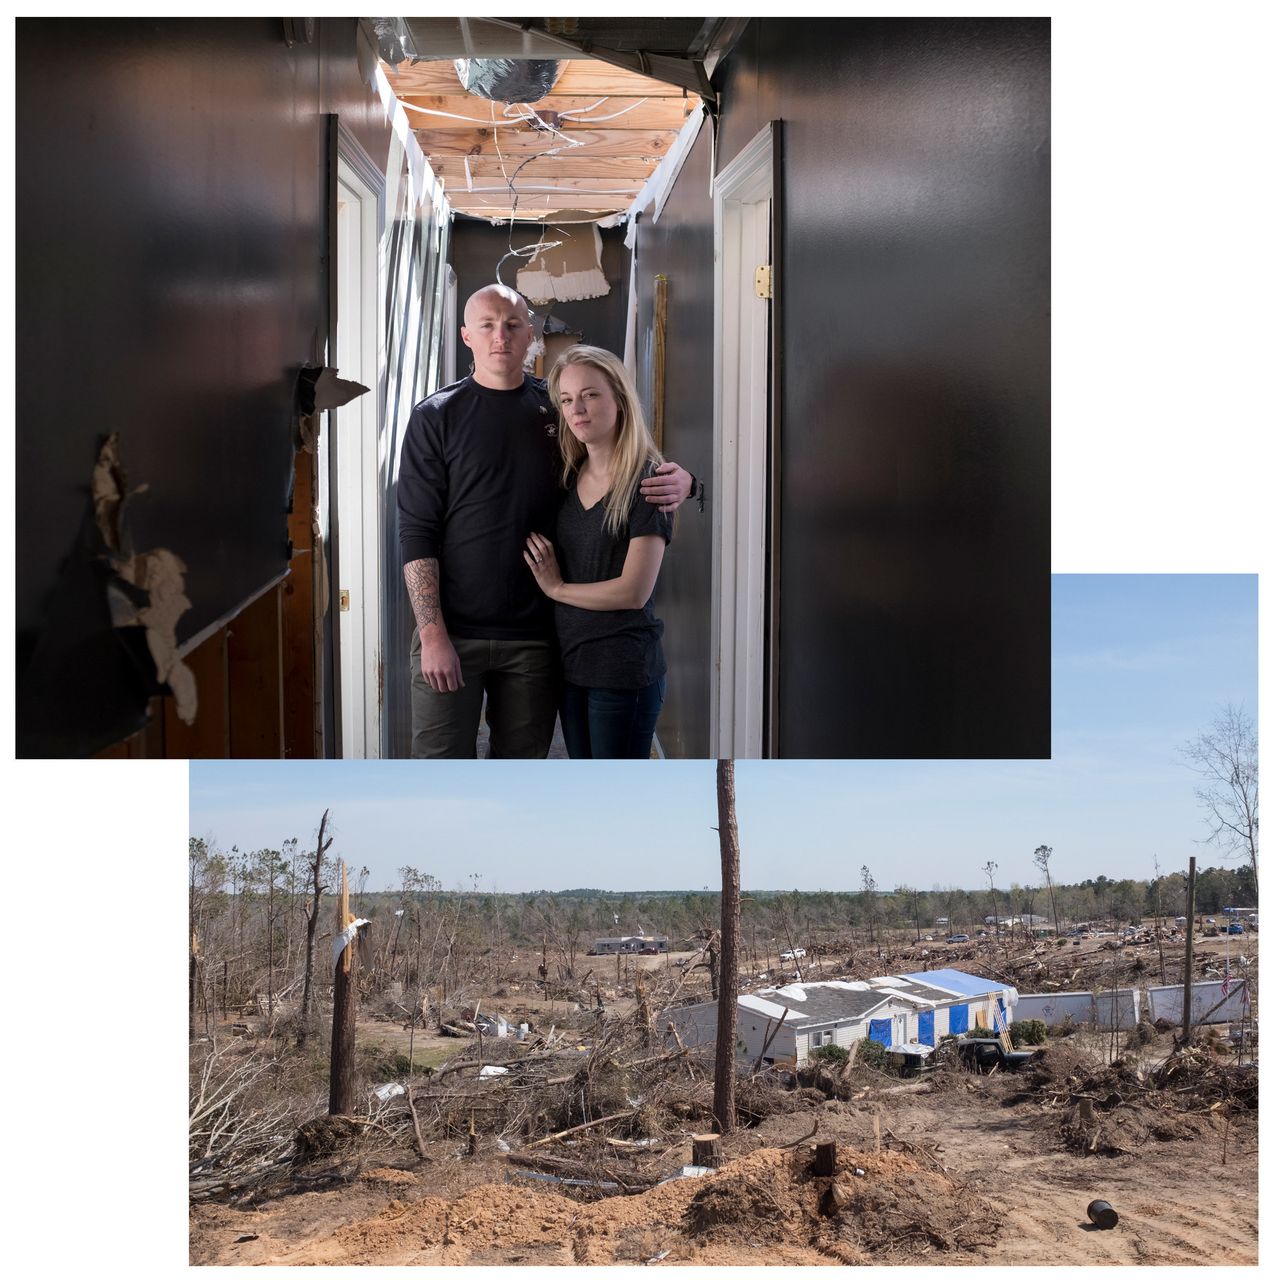 (Top) Chance Norton and her fiance, Phillip Bell. (Bottom) The view overlooking the community along Lee Road 38 in eastern Alabama that was battered by the tornado.